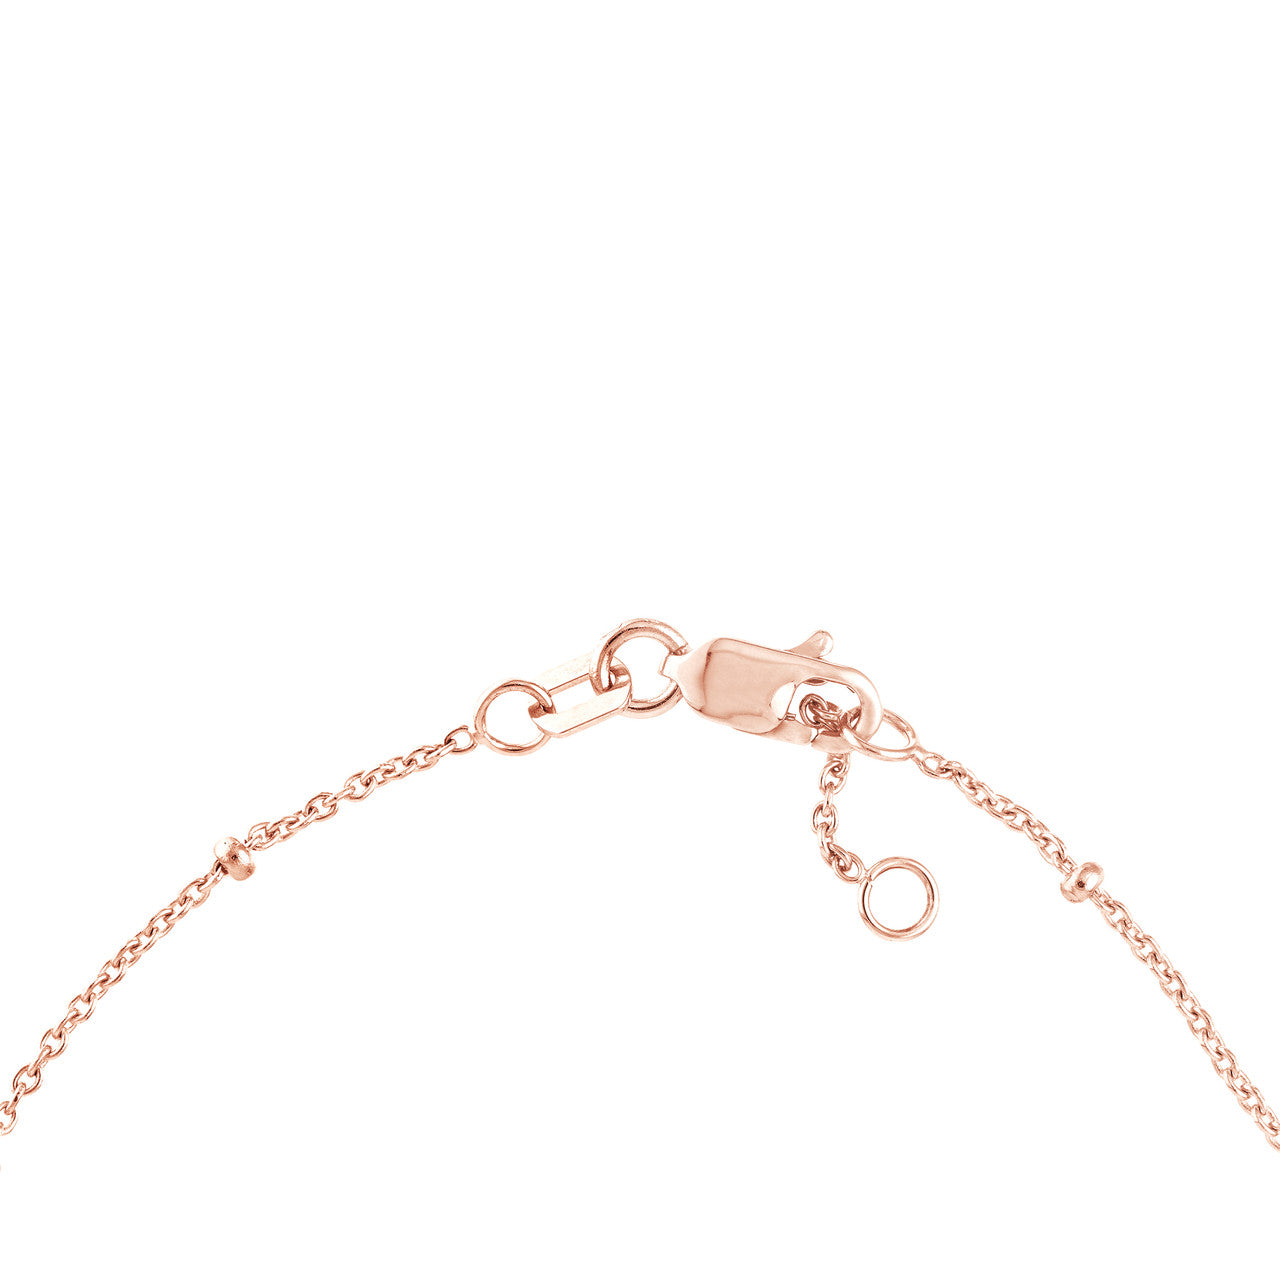 close up of the bracelet clasp in rose gold with beaded chain